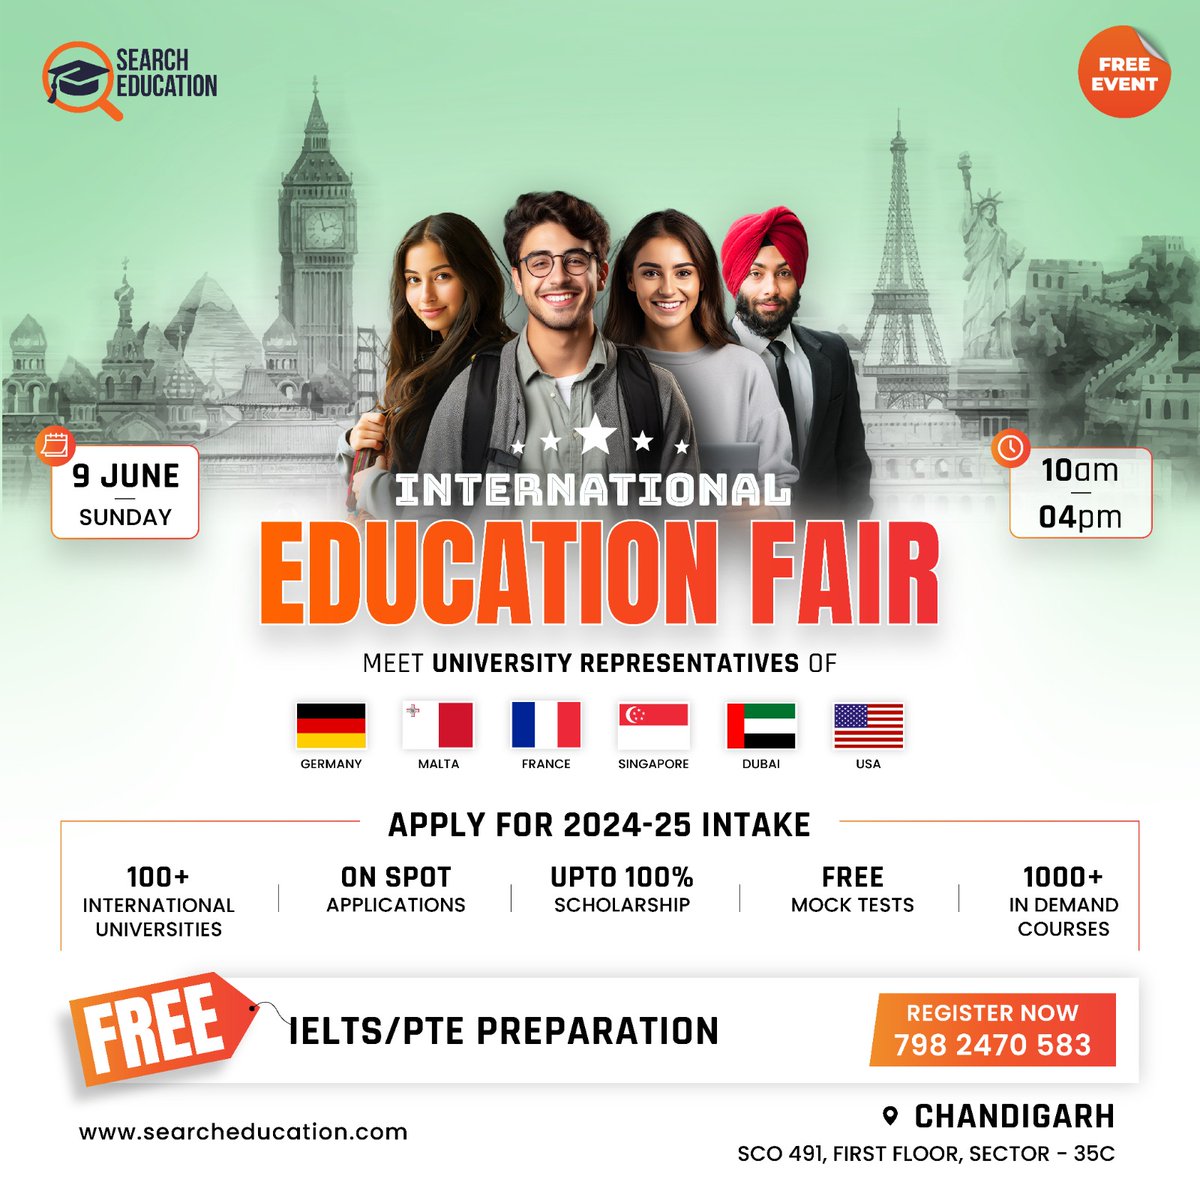 Be a Part of India's Biggest International Education Fair 2024 📍 Chandigarh 🌍
#internationaleducationfair #studyabroad #abroadeducation #studyabroadfair #abroadstudy #studyinuk #studyincanada #studyinusa #studyingermany #globaleducation #worldeducation #internationaleducation